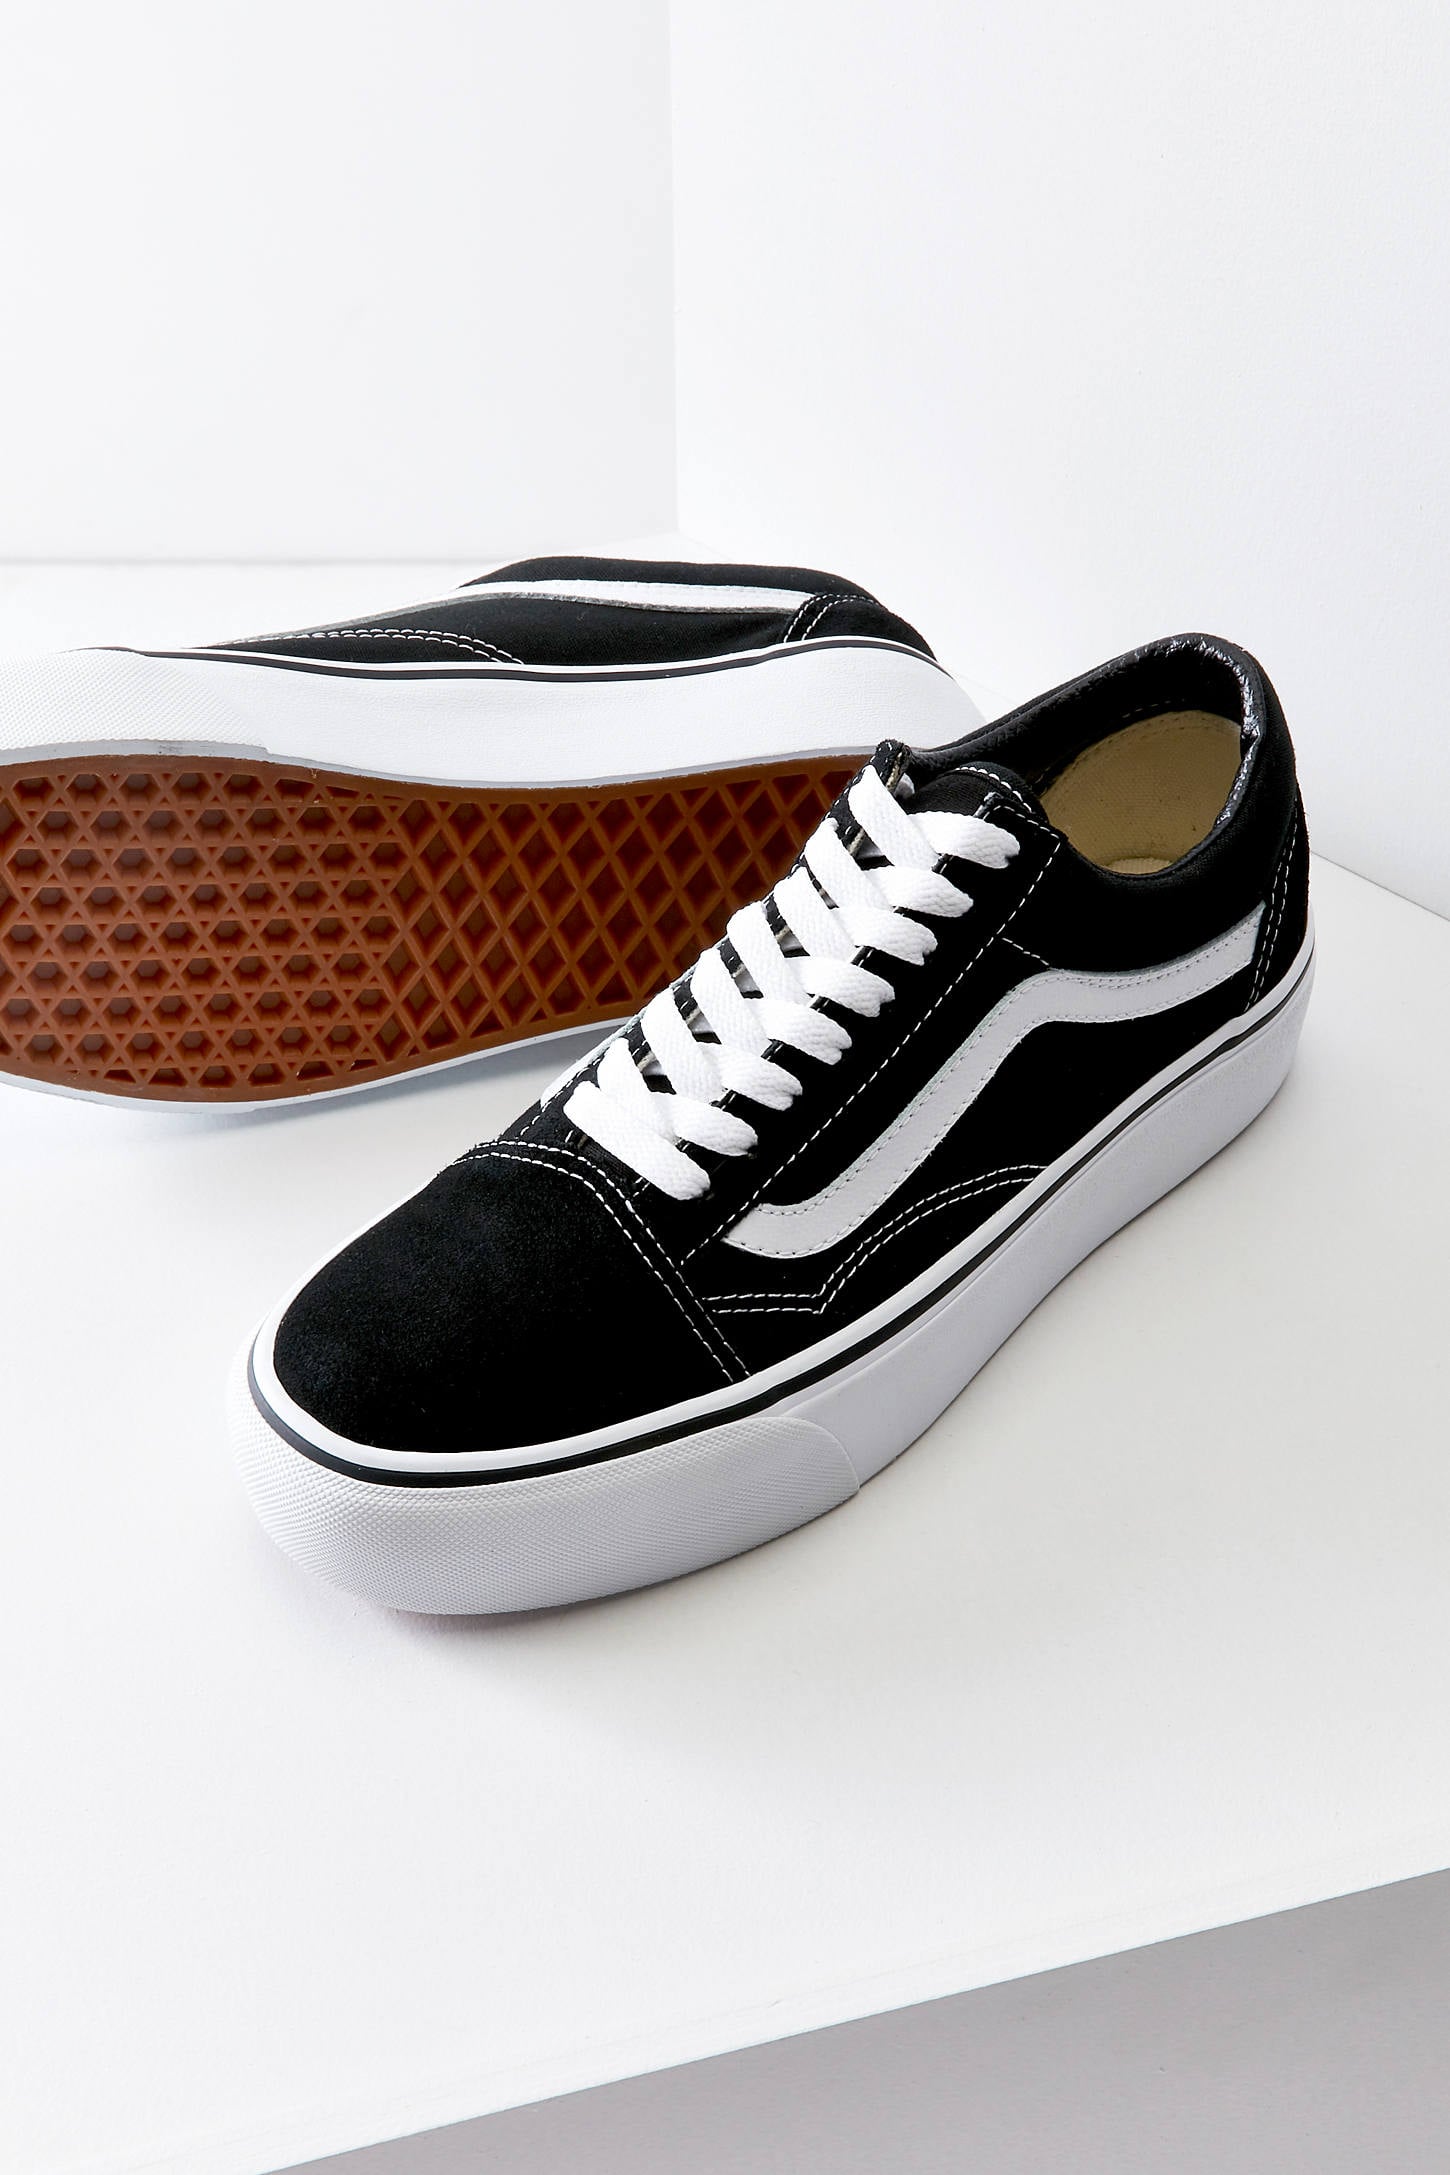 to wear old skool vans with style 